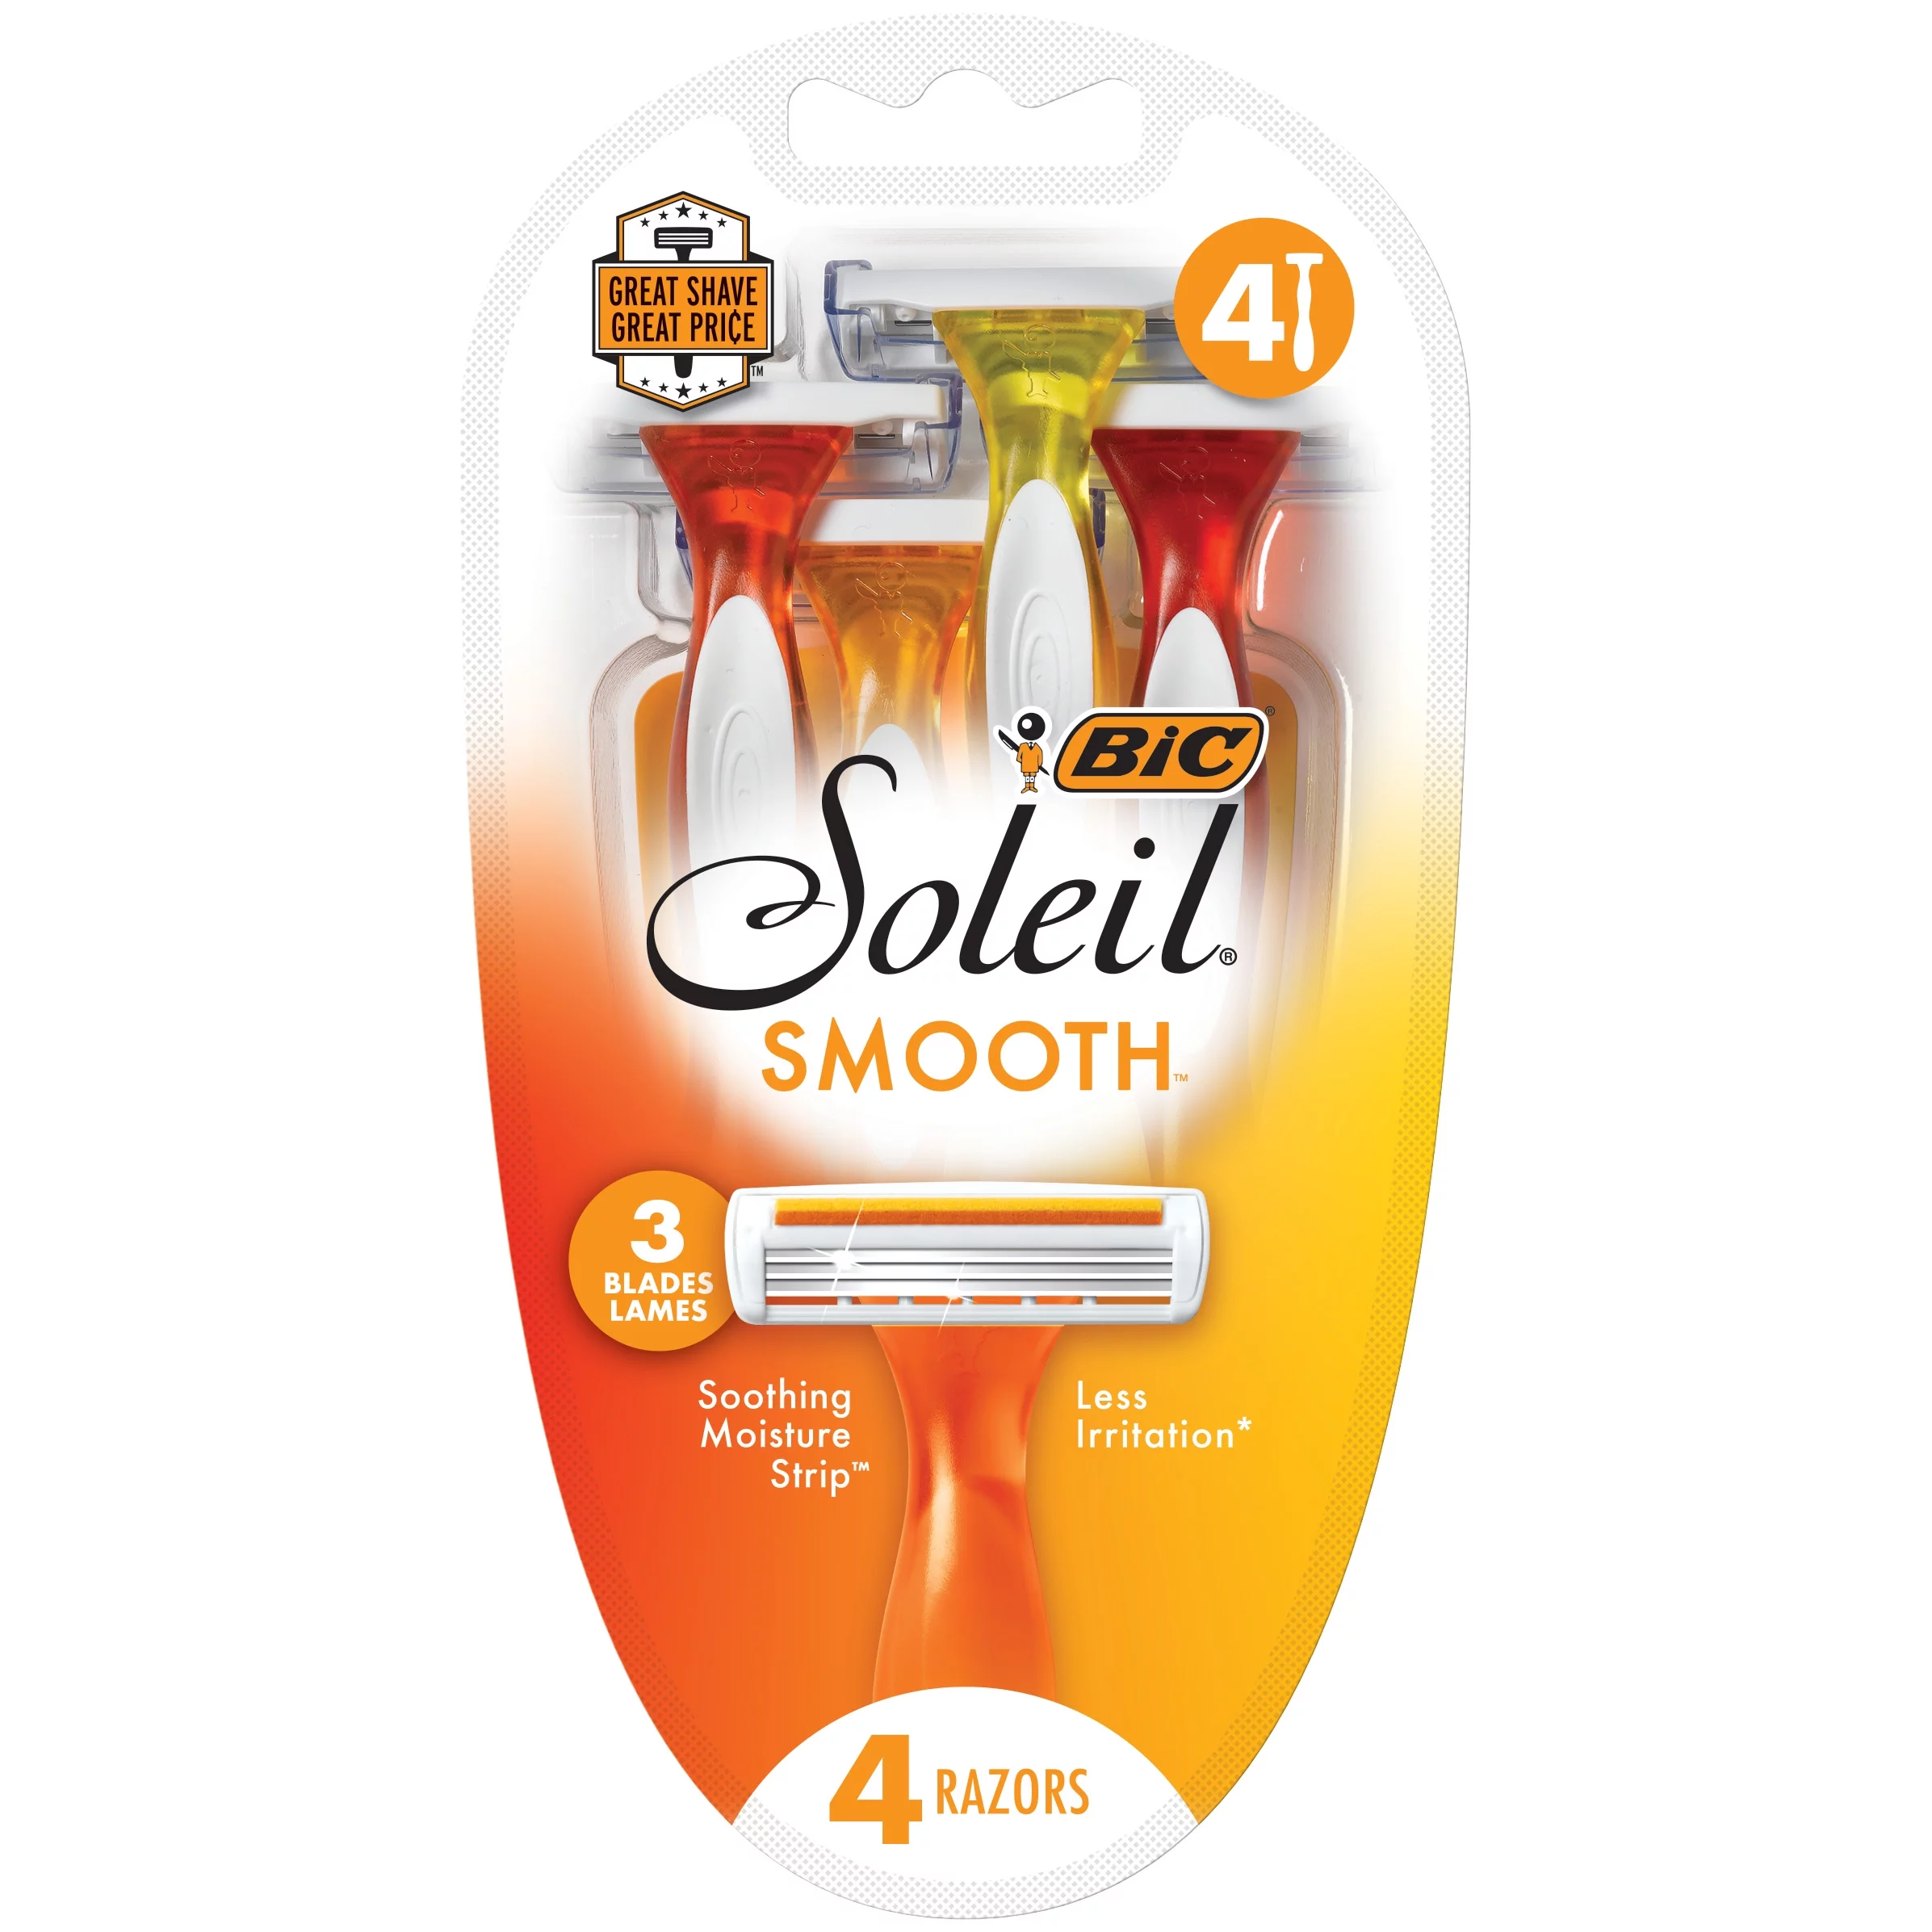 BIC Soleil Smooth Women's Disposable Razors, 3 Blades with Silky Moisture Strip, 4-Count